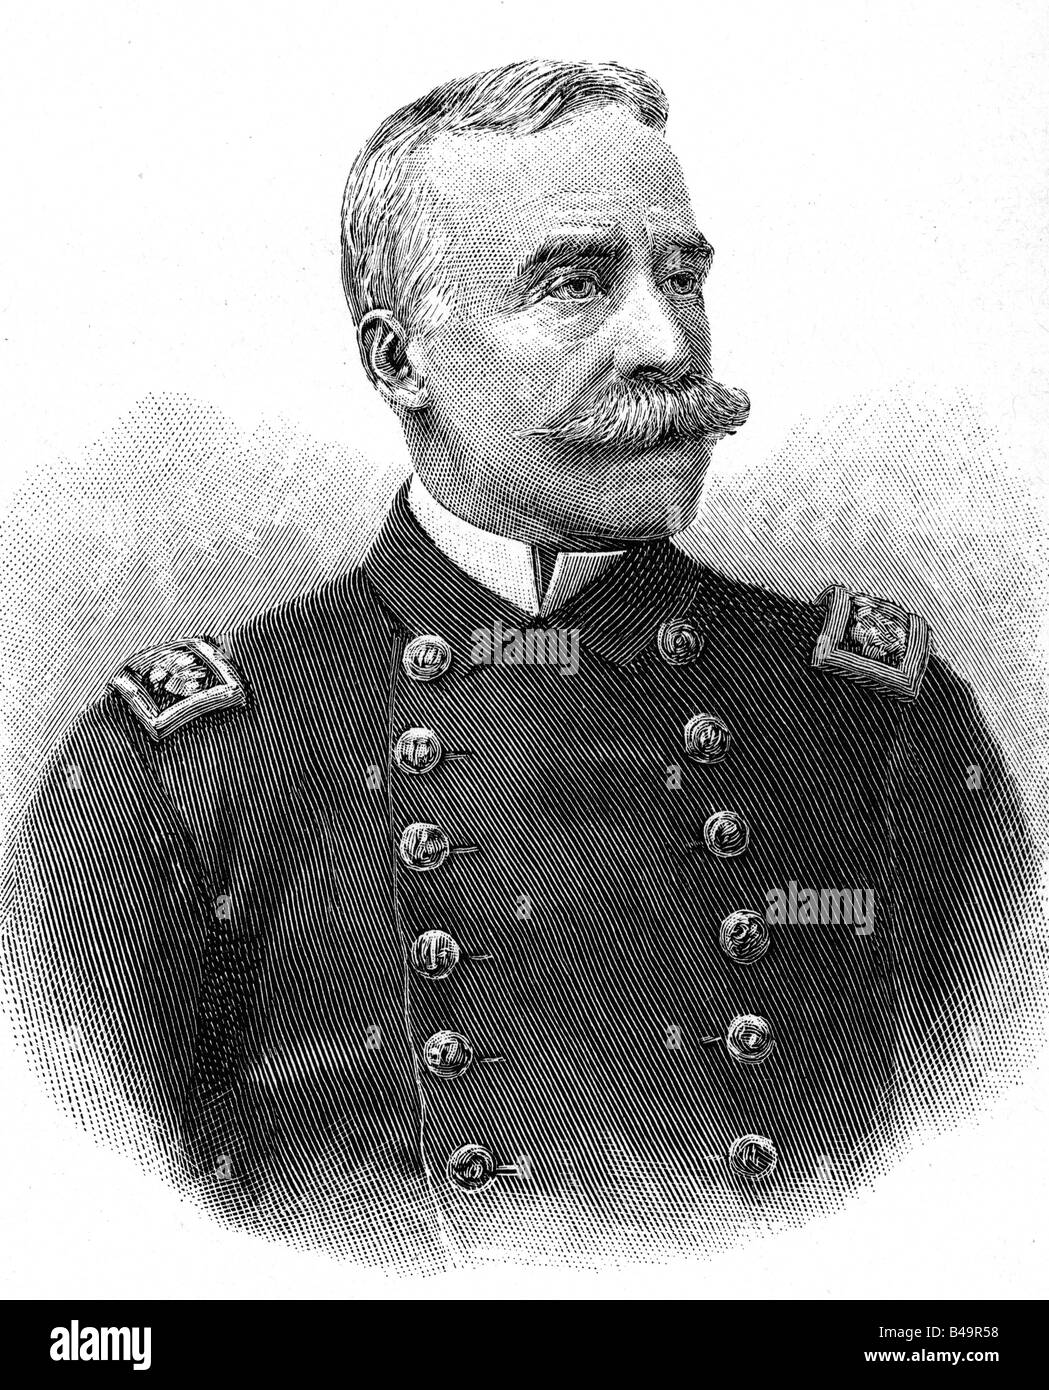 Dewey, George, 26.12.1837 - 16.1.1917, admiral of the United States of America, commander of the US Pacific Fleet 1898, later commander in chief of the US Navy, portrait, wood engraving, 1898, Stock Photo